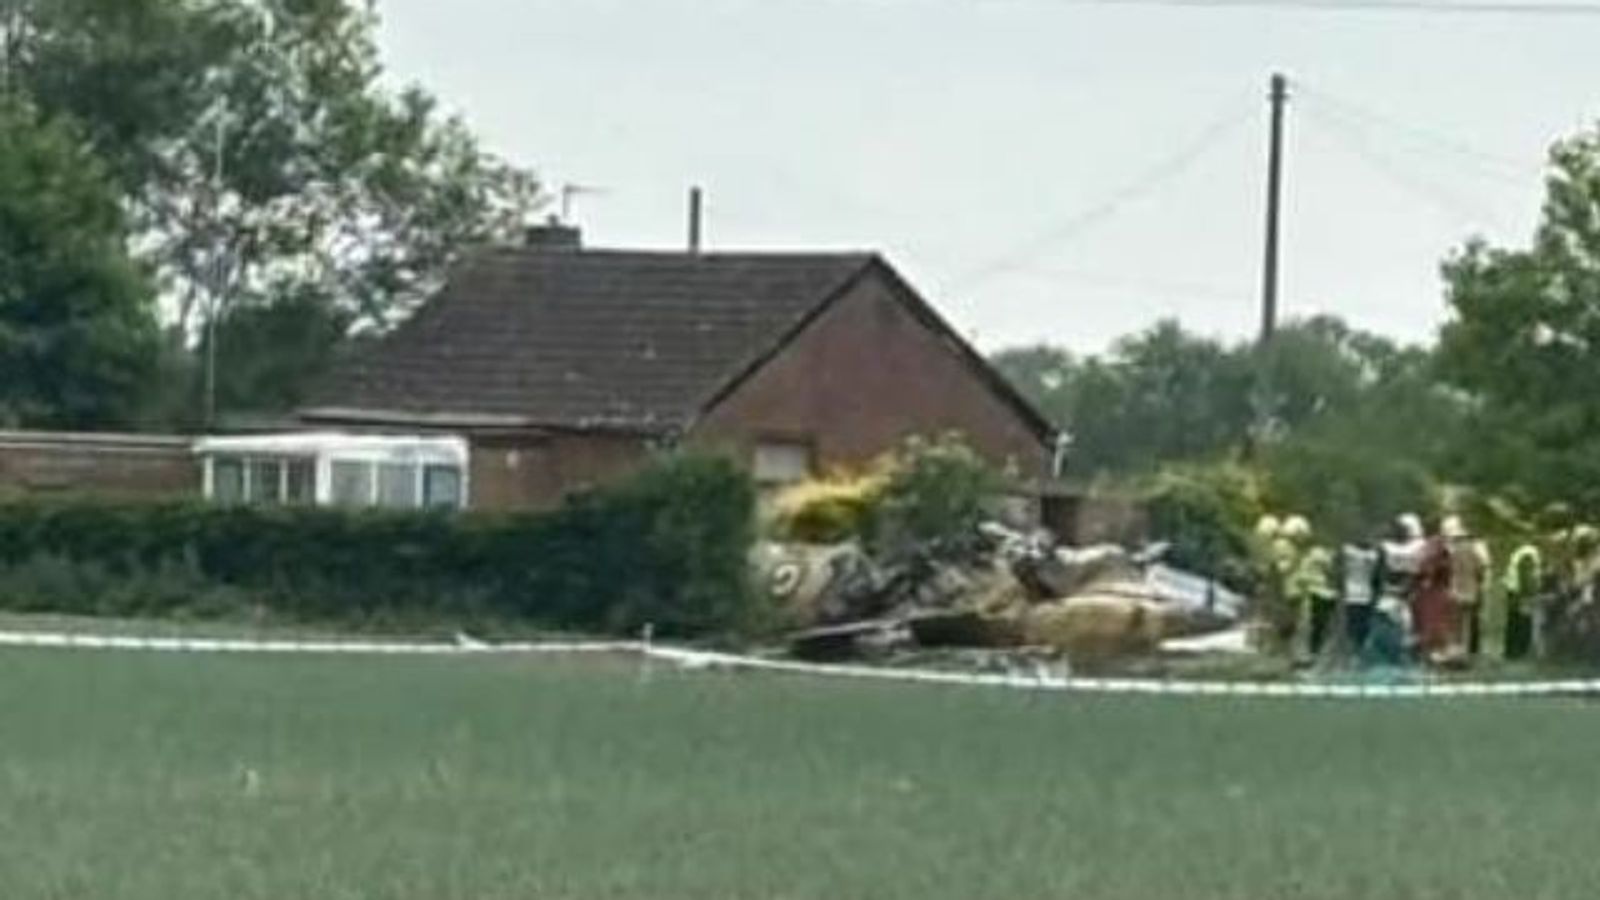 RAF pilot dies after Spitfire crashes in field near Coningsby base in